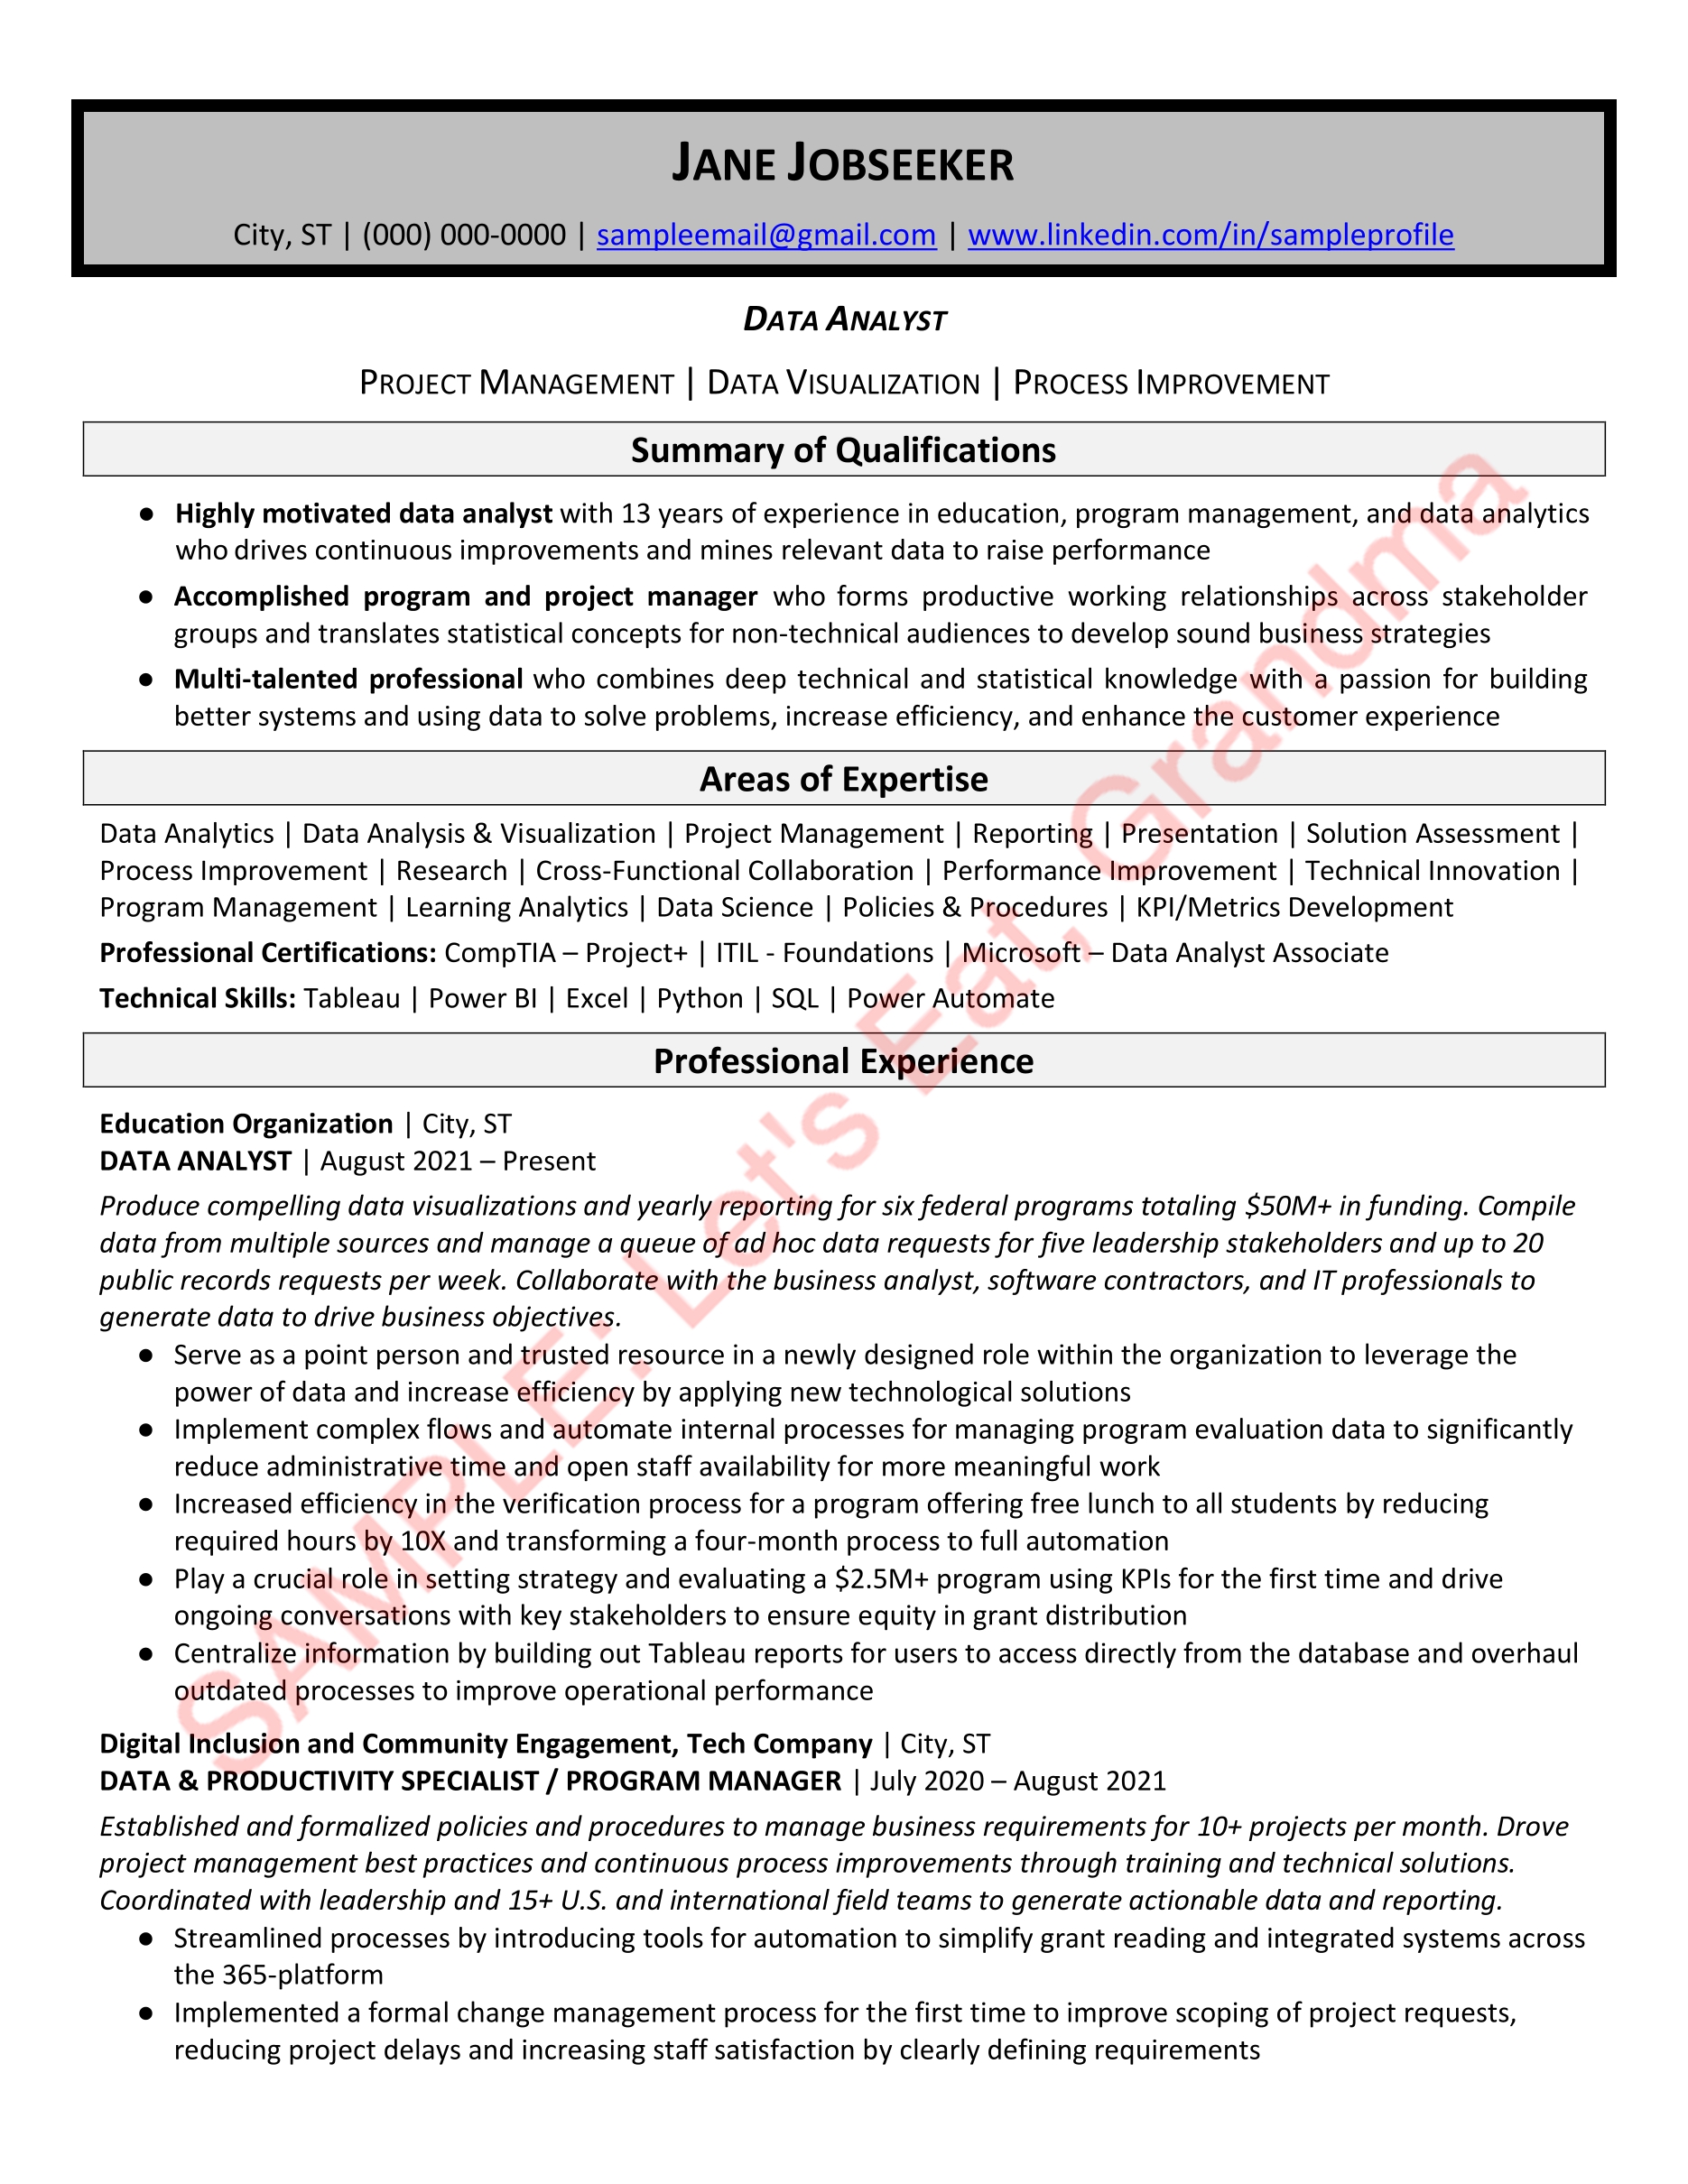 Page 1 of sample Data Analyst resume from Let's Eat, Grandma, the Best Resume Writing Service of 2022